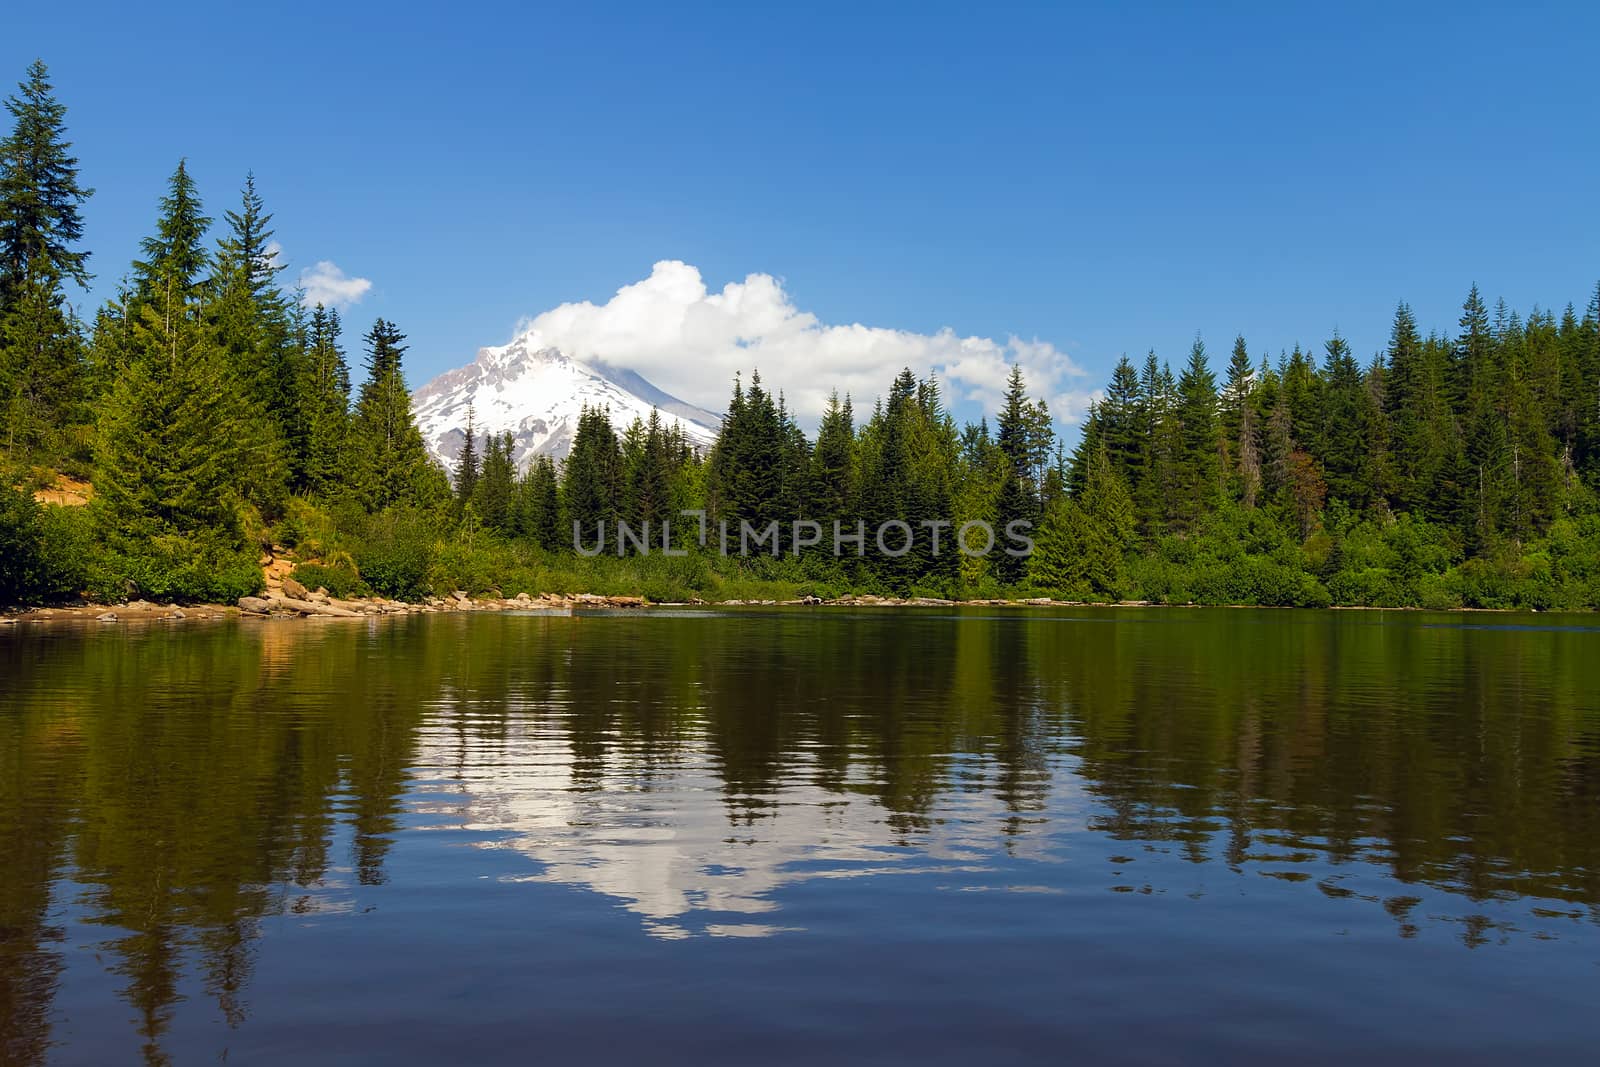 Mount Hood reflection on Mirror Lake on a blue sky day in Oregon